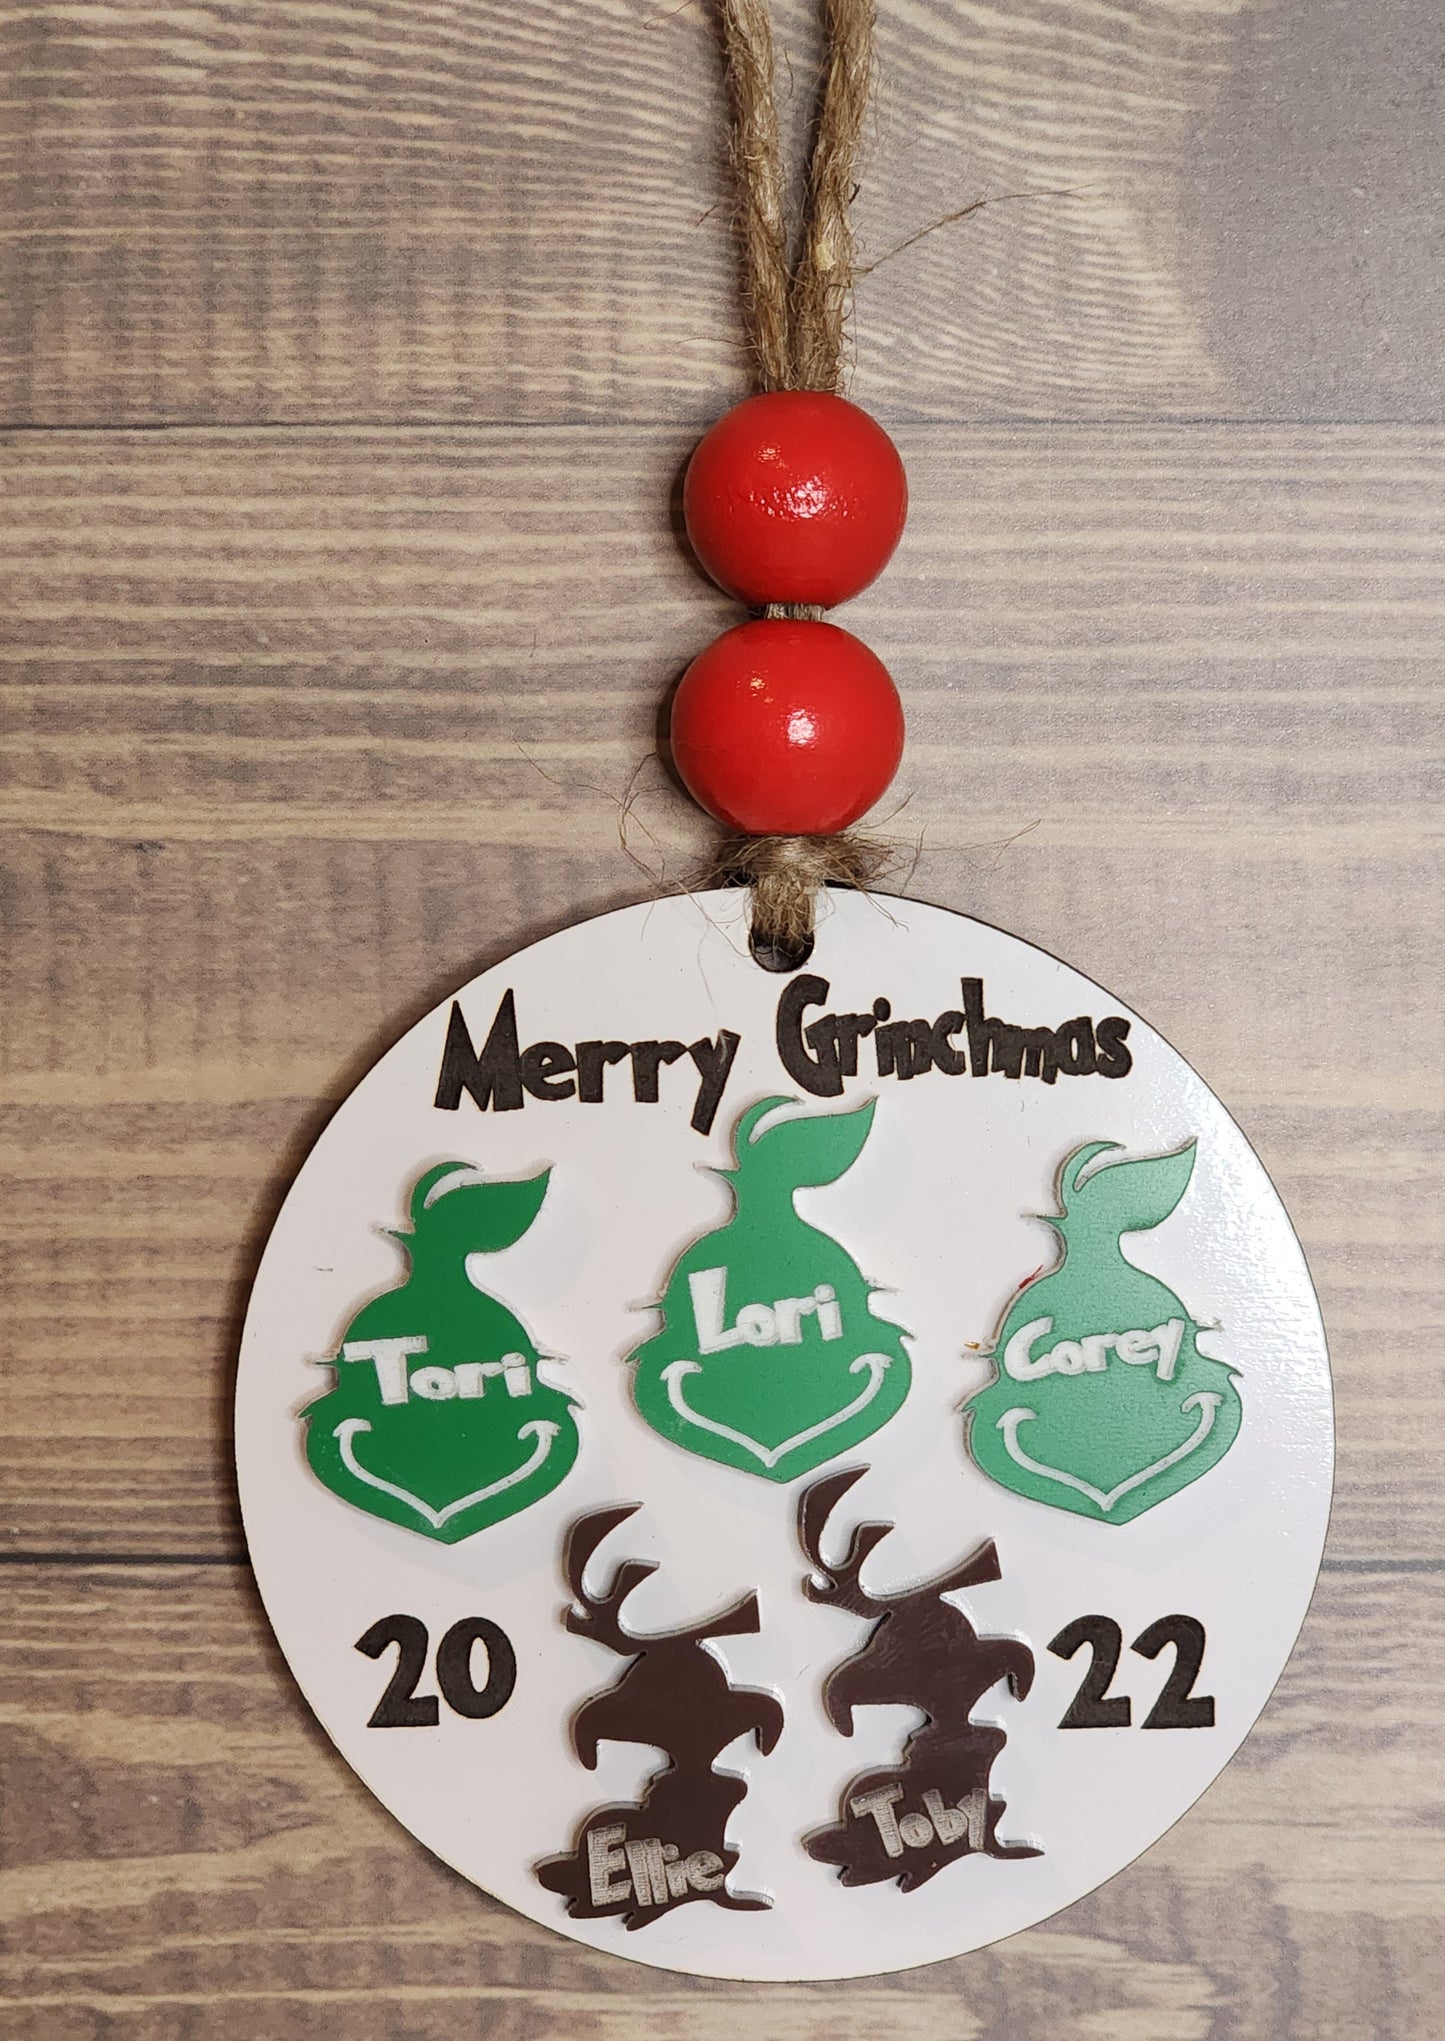 Personalized Grinch ornament